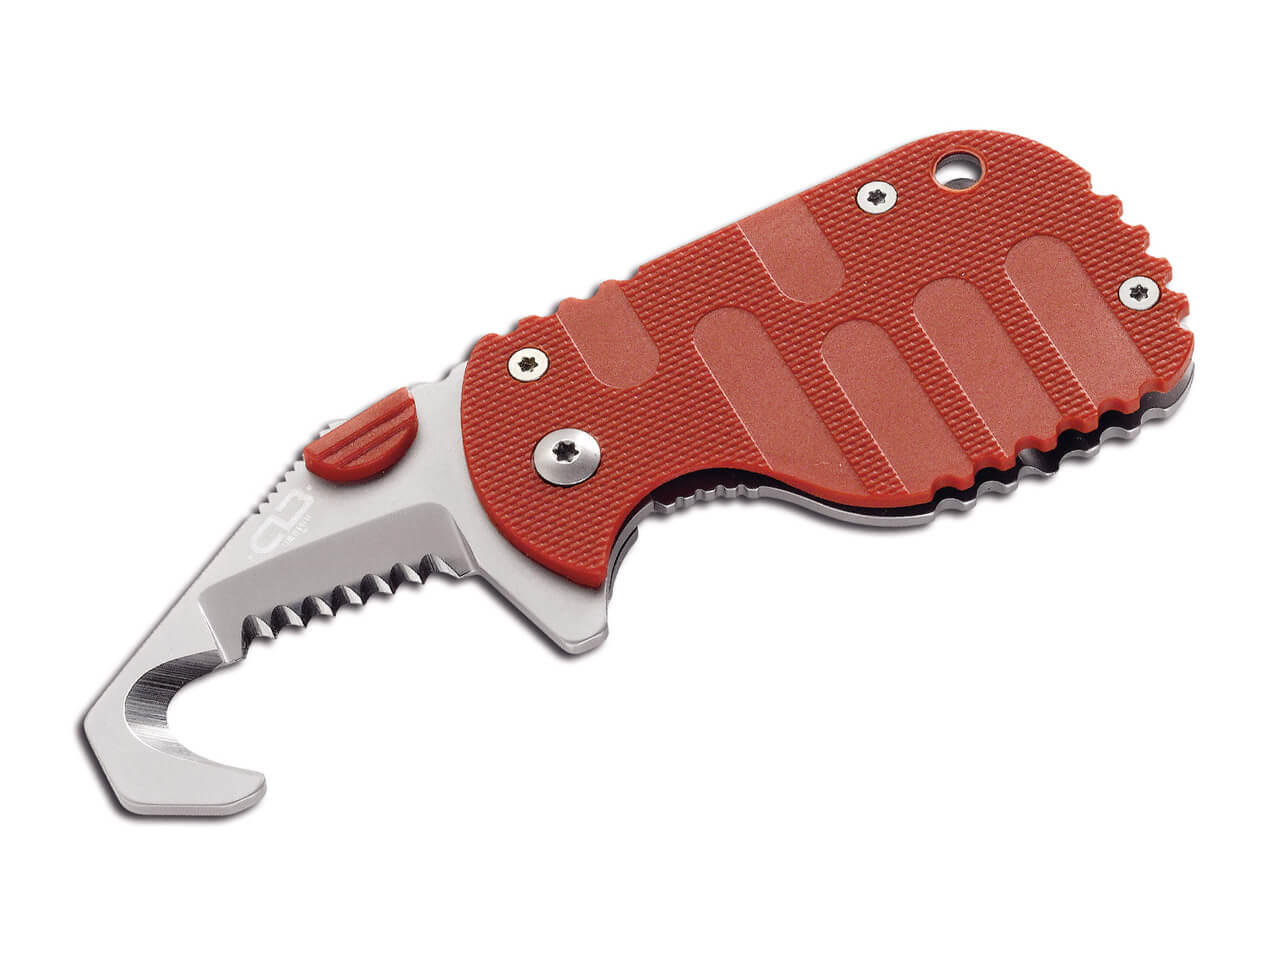 Retractable Utility Knife, Box Cutter Letter Opener Pocket Knives, Red